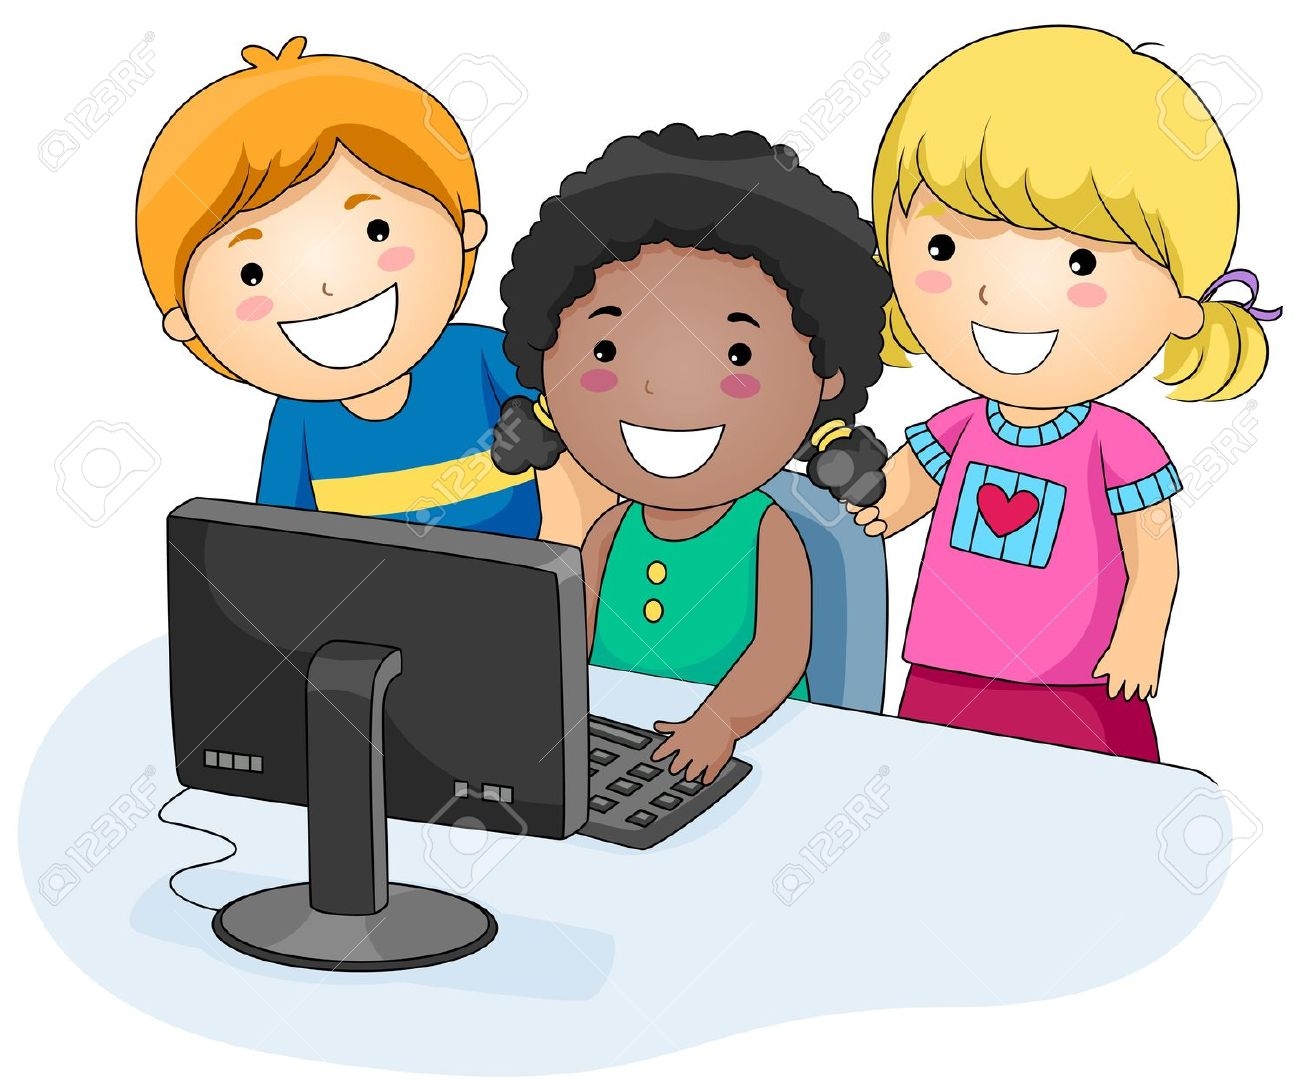 Children working on computer Royalty Free Vector Image